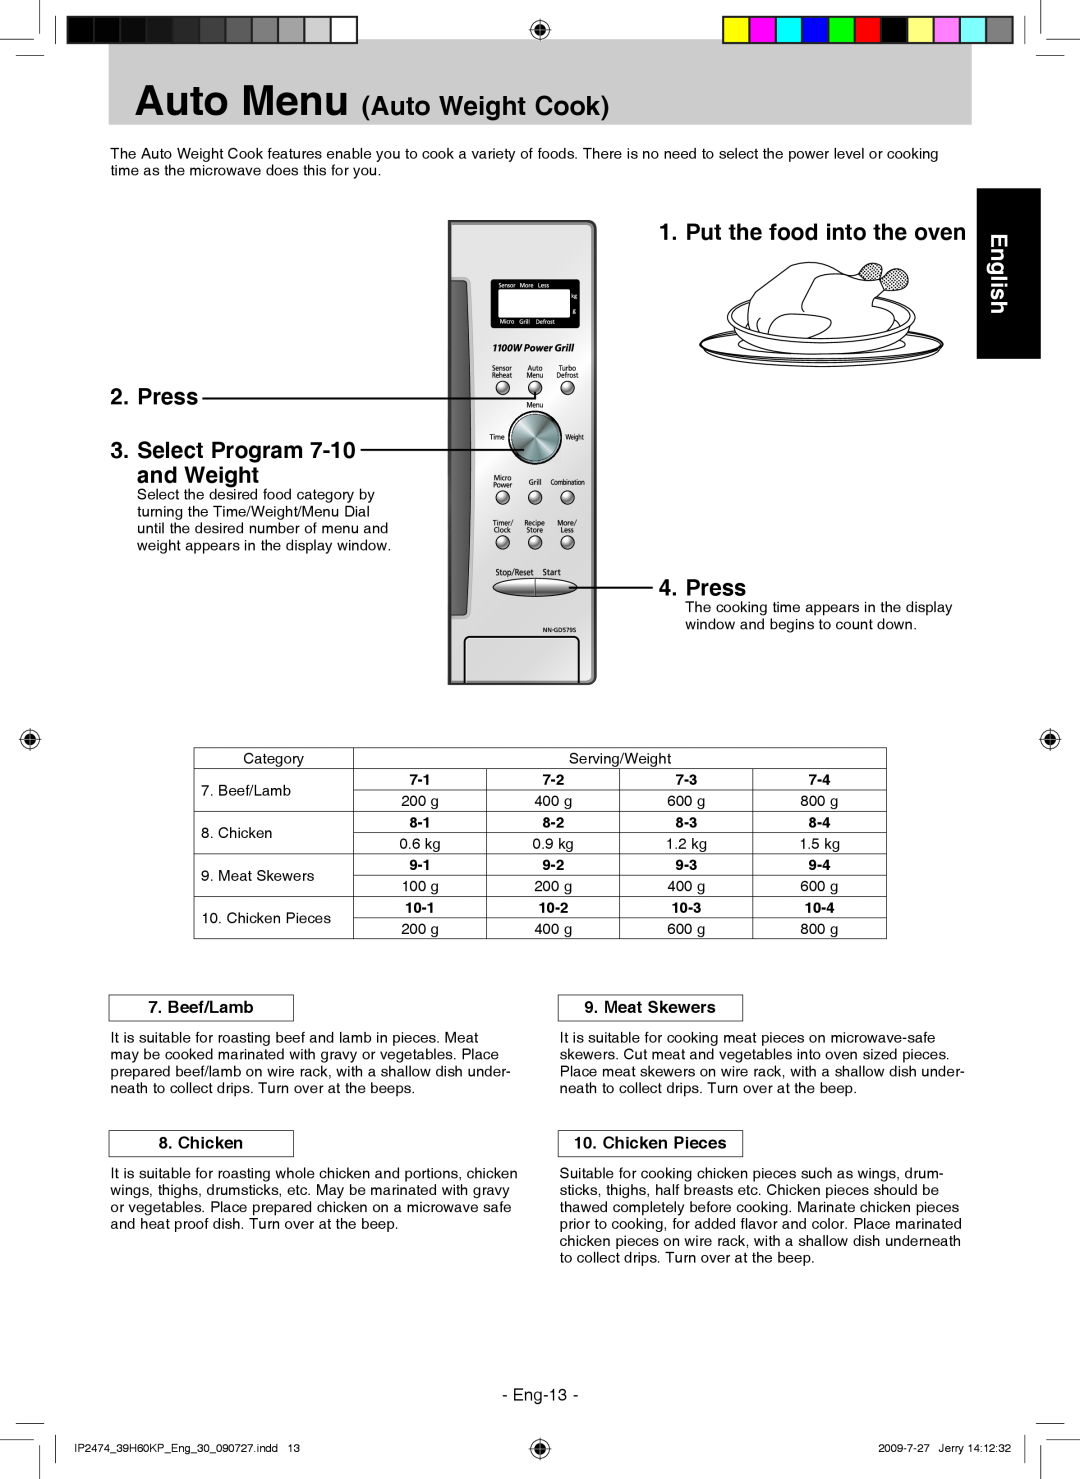 Panasonic NN-GD579S Auto Menu Auto Weight Cook, Put the food into the oven 2. Press 3. Select Program and Weight, English 